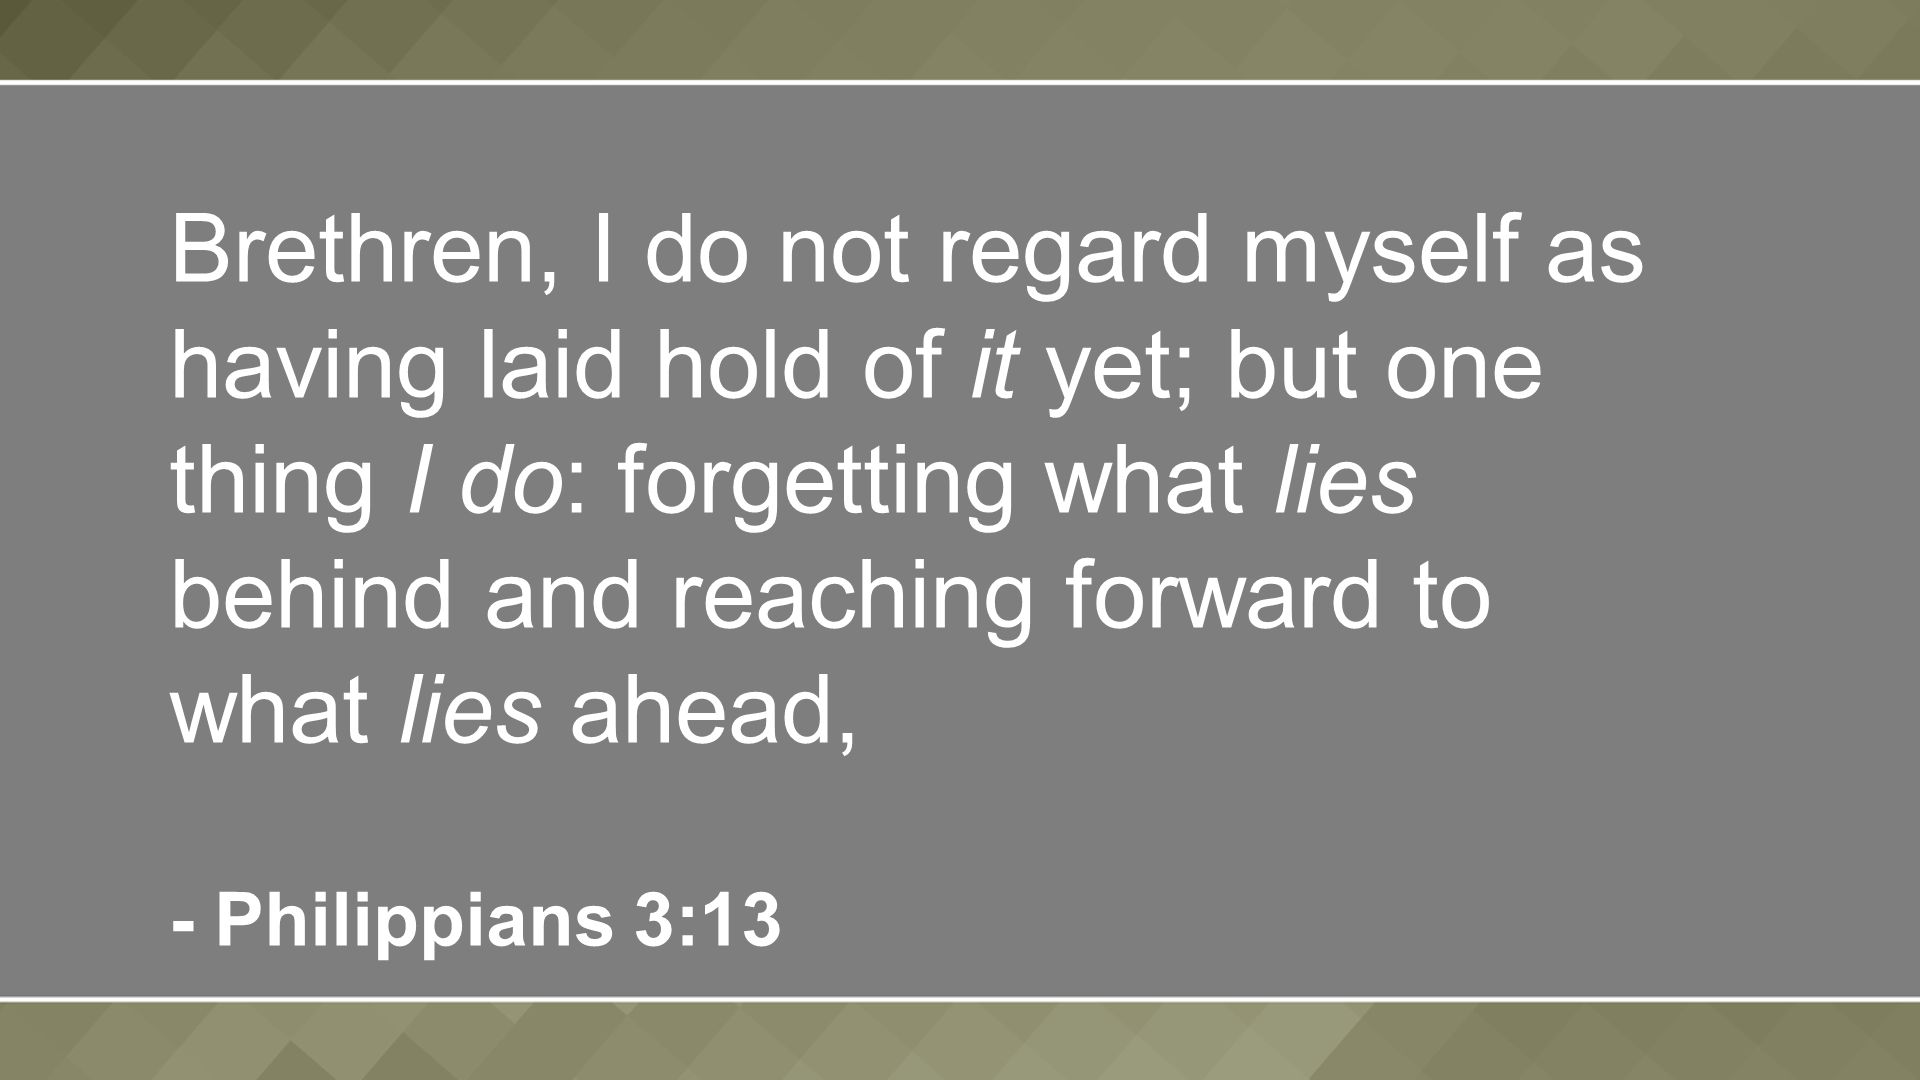 Brethren, I do not regard myself as having laid hold of it yet; but one thing I do: forgetting what lies behind and reaching forward to what lies ahead, - Philippians 3:13